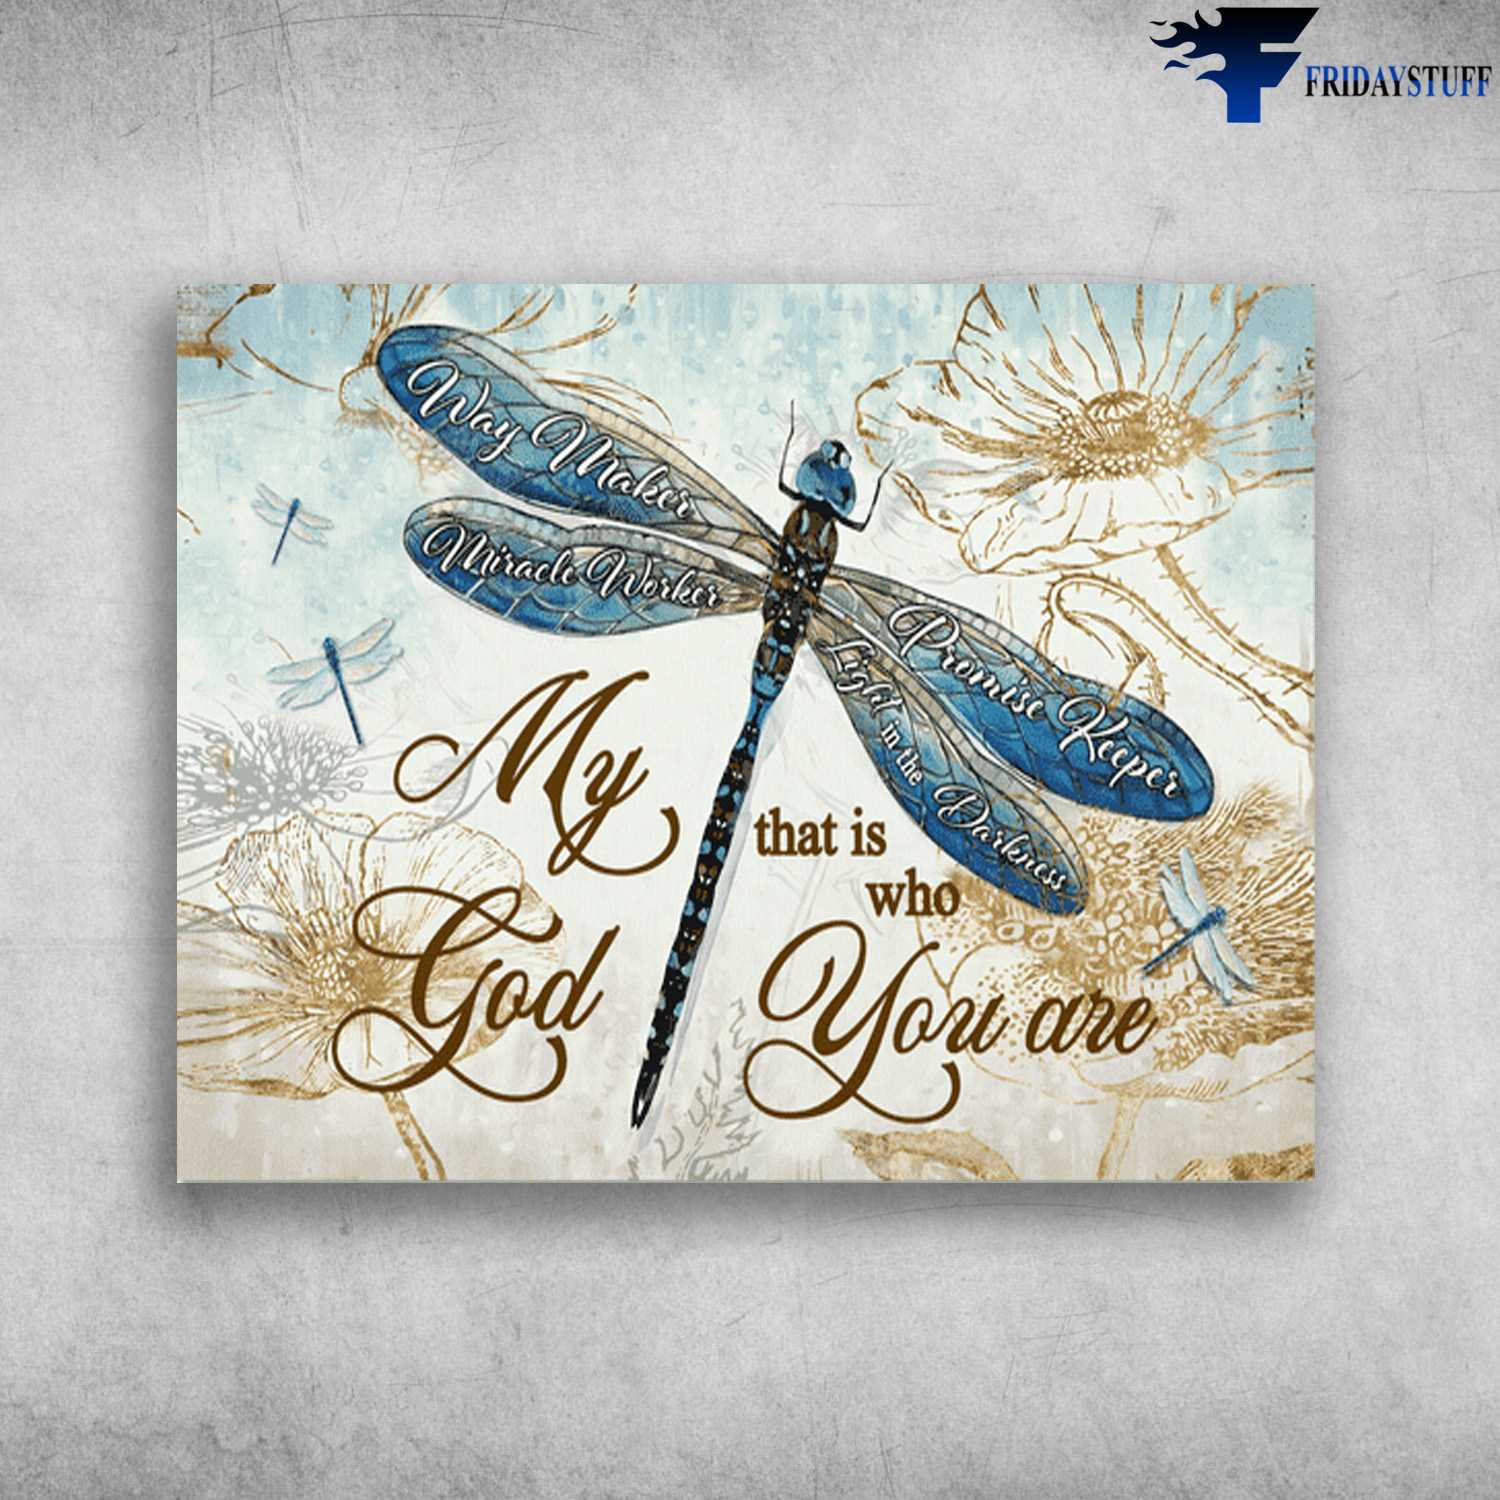 Dragonfly Poster, Way Maker, Miracle Worker, Promise Keeper, Light In The Darkness, My God, That Is Who You Are